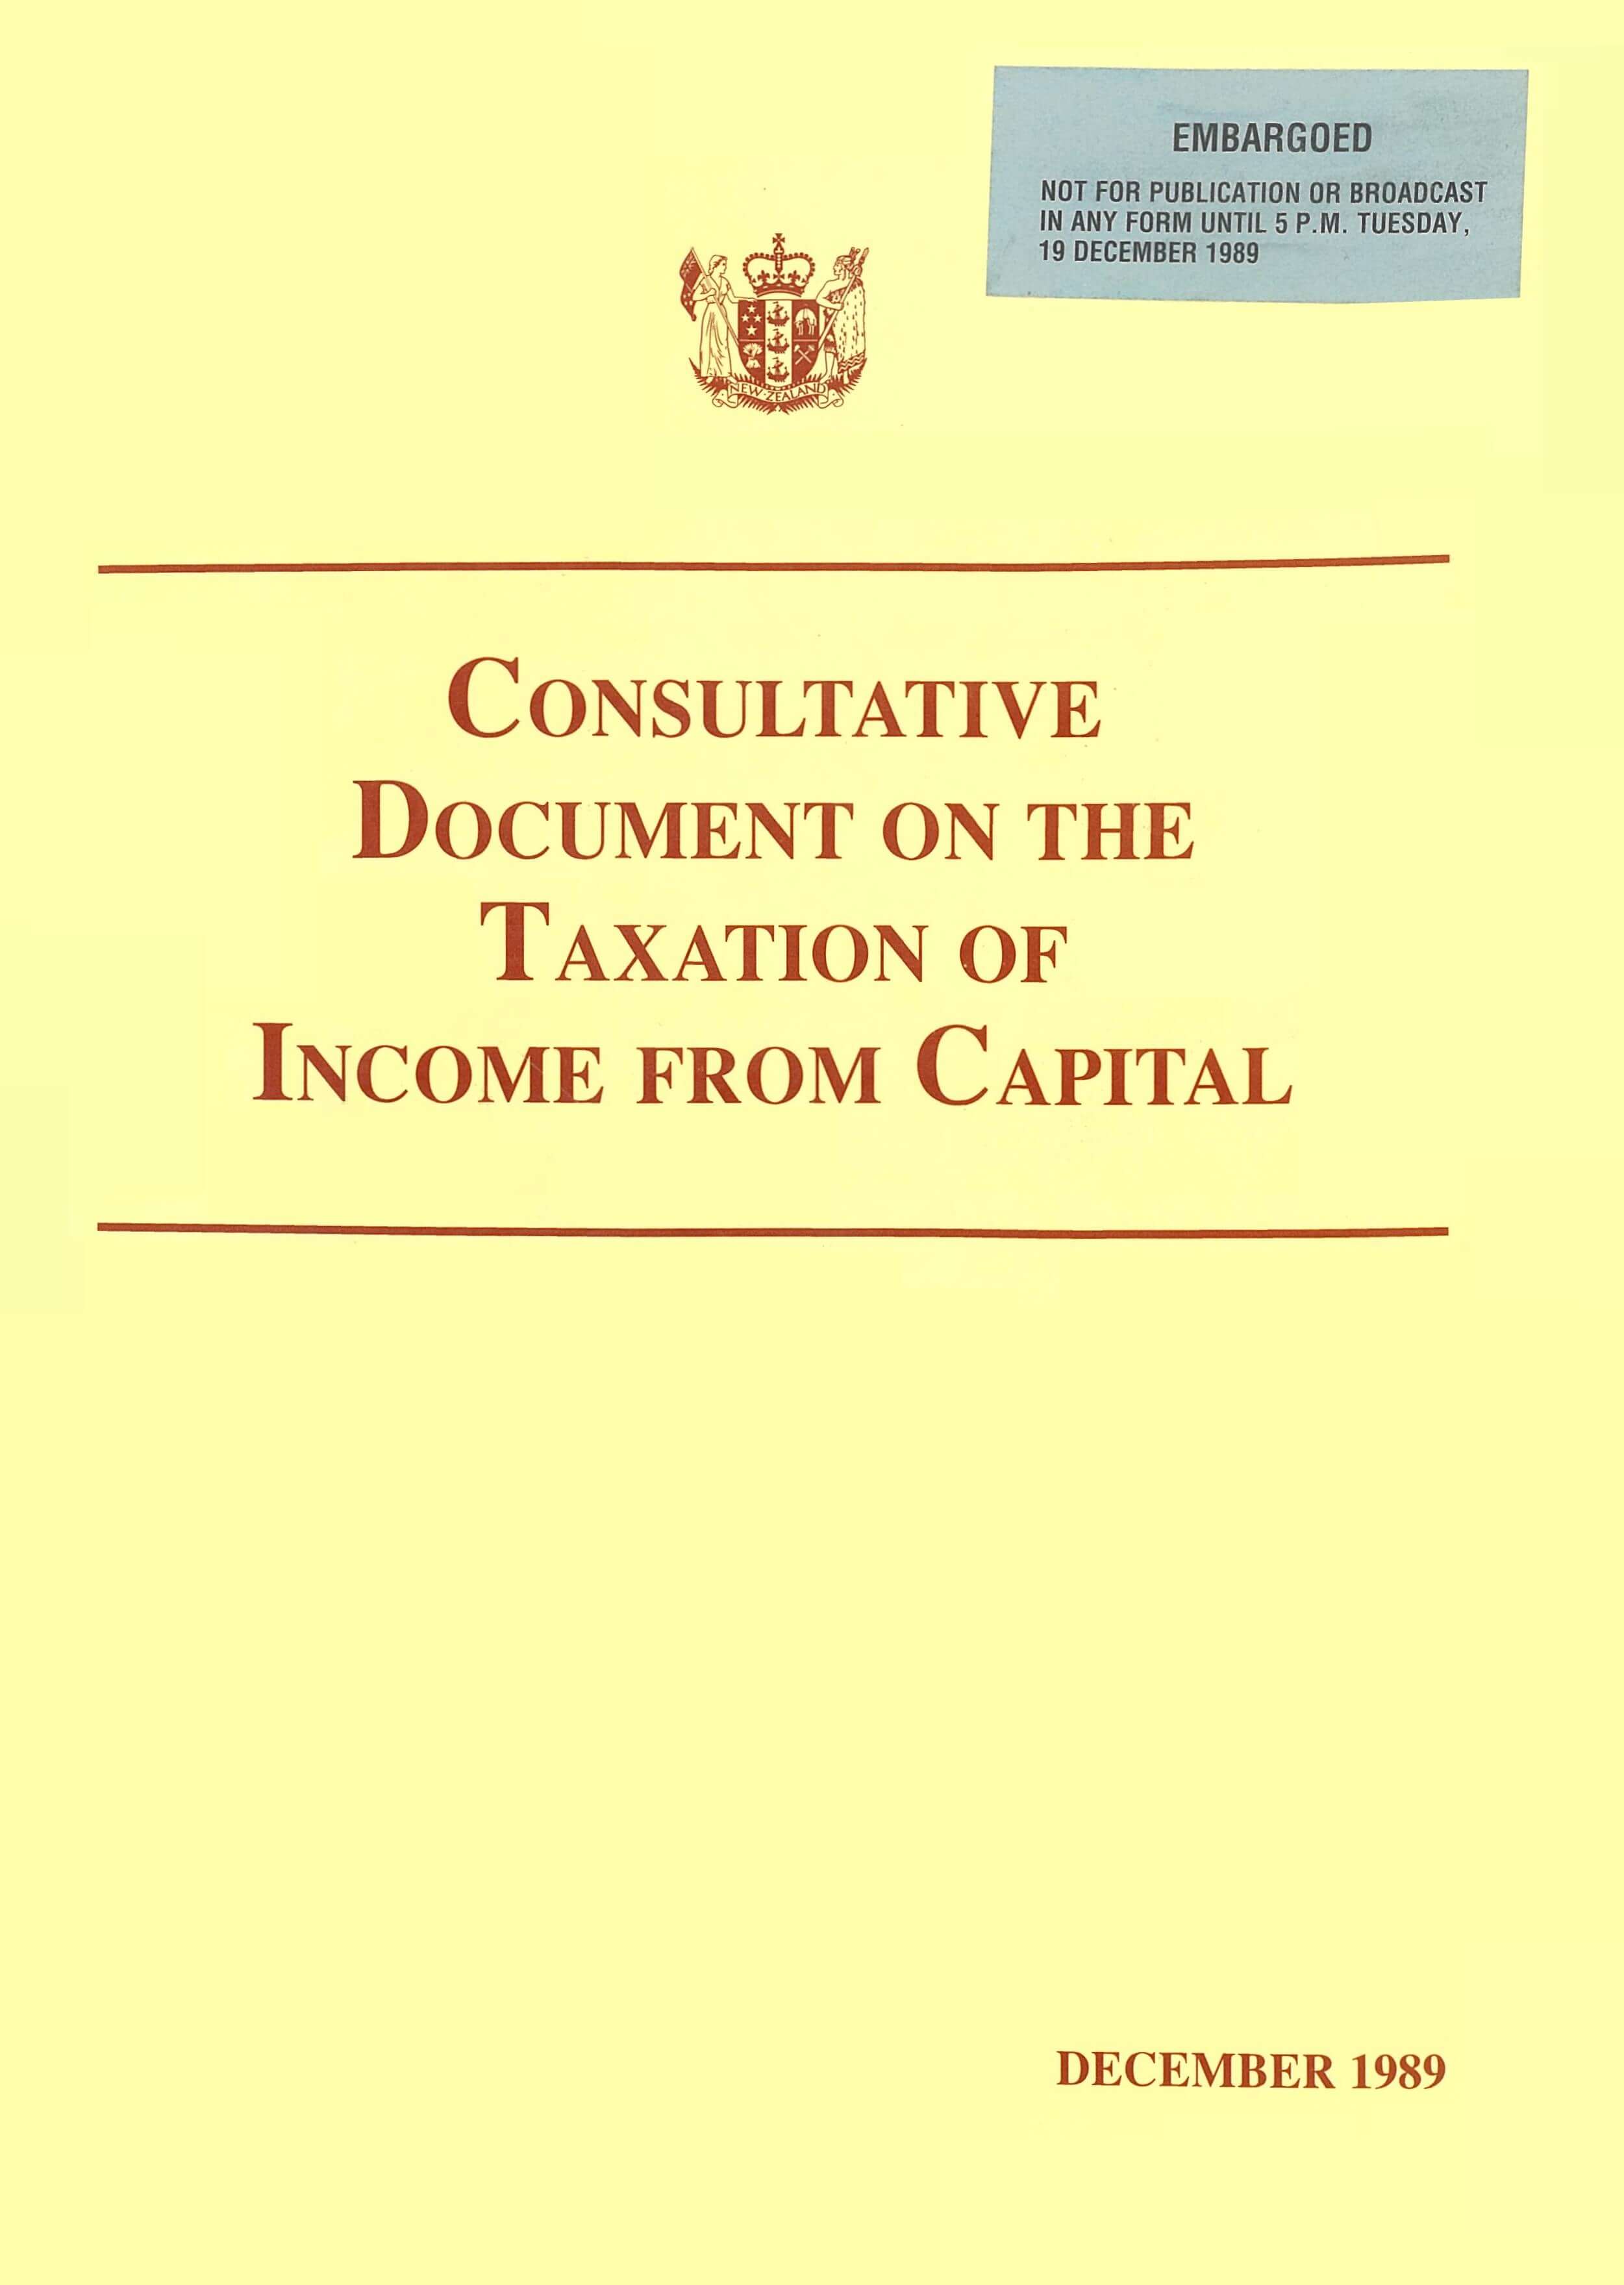 Publication cover with New Zealand coat of arms, Title - Consultative document on the taxation of income from capital, Publication date - December 1989